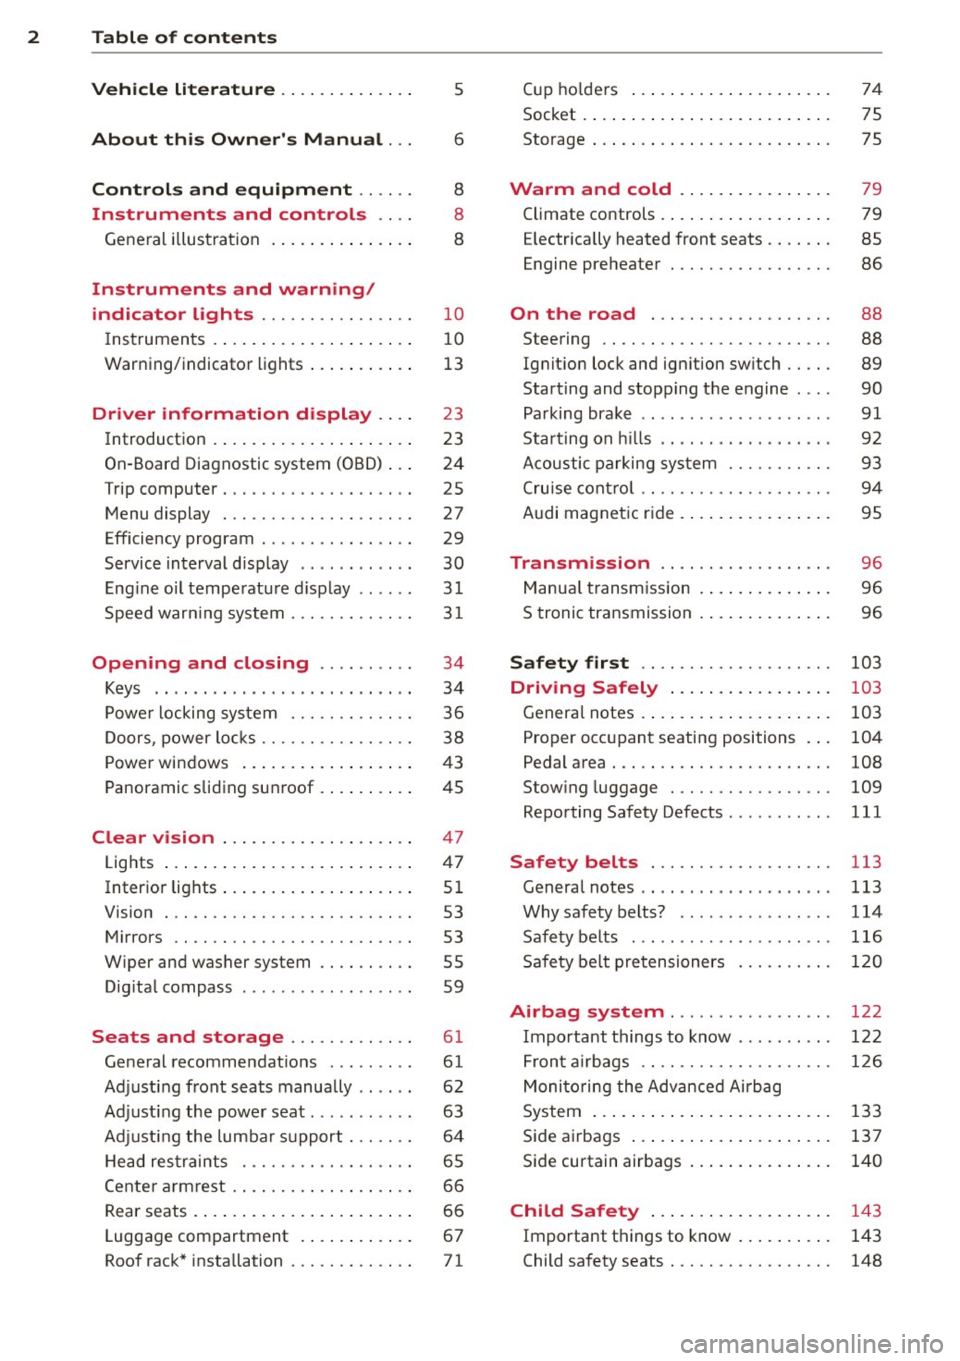 AUDI S3 2012  Owners Manual 2  Table  of  contents Vehicle  literature  .. .. .. .. .. ... . 
About  this  Owners  Manual  ... 
Controls  and  equipment  .. ...  . 
Ins truments  and  controls  .. . . 
General  illus tration  .